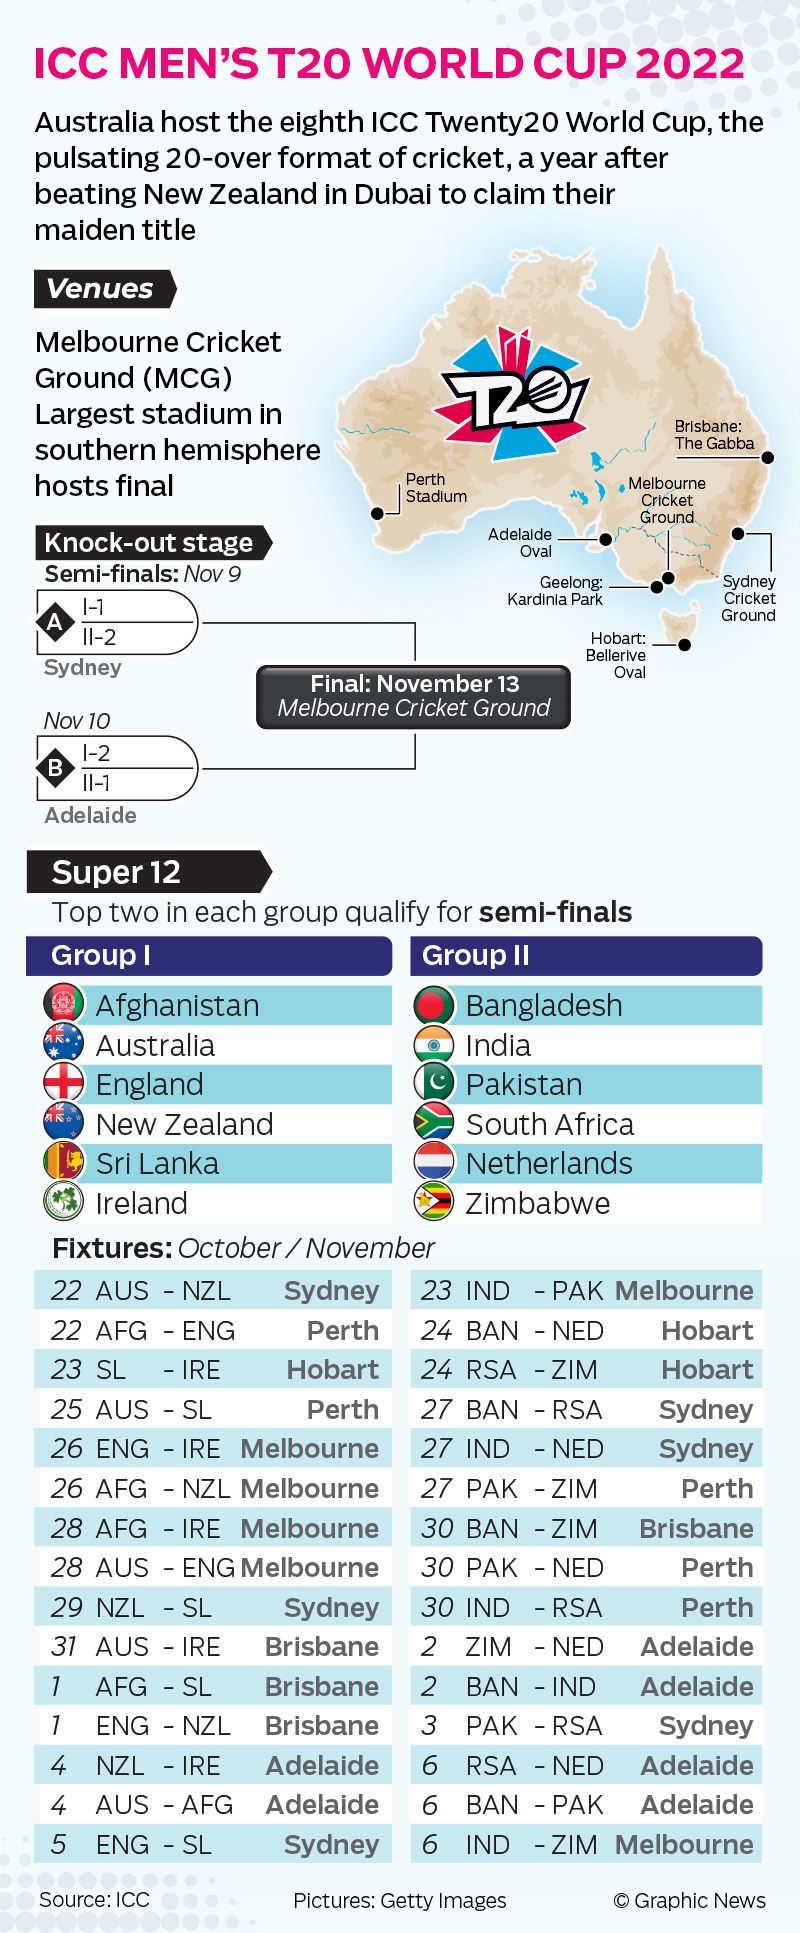 T20 World Cup 2022 fixtures